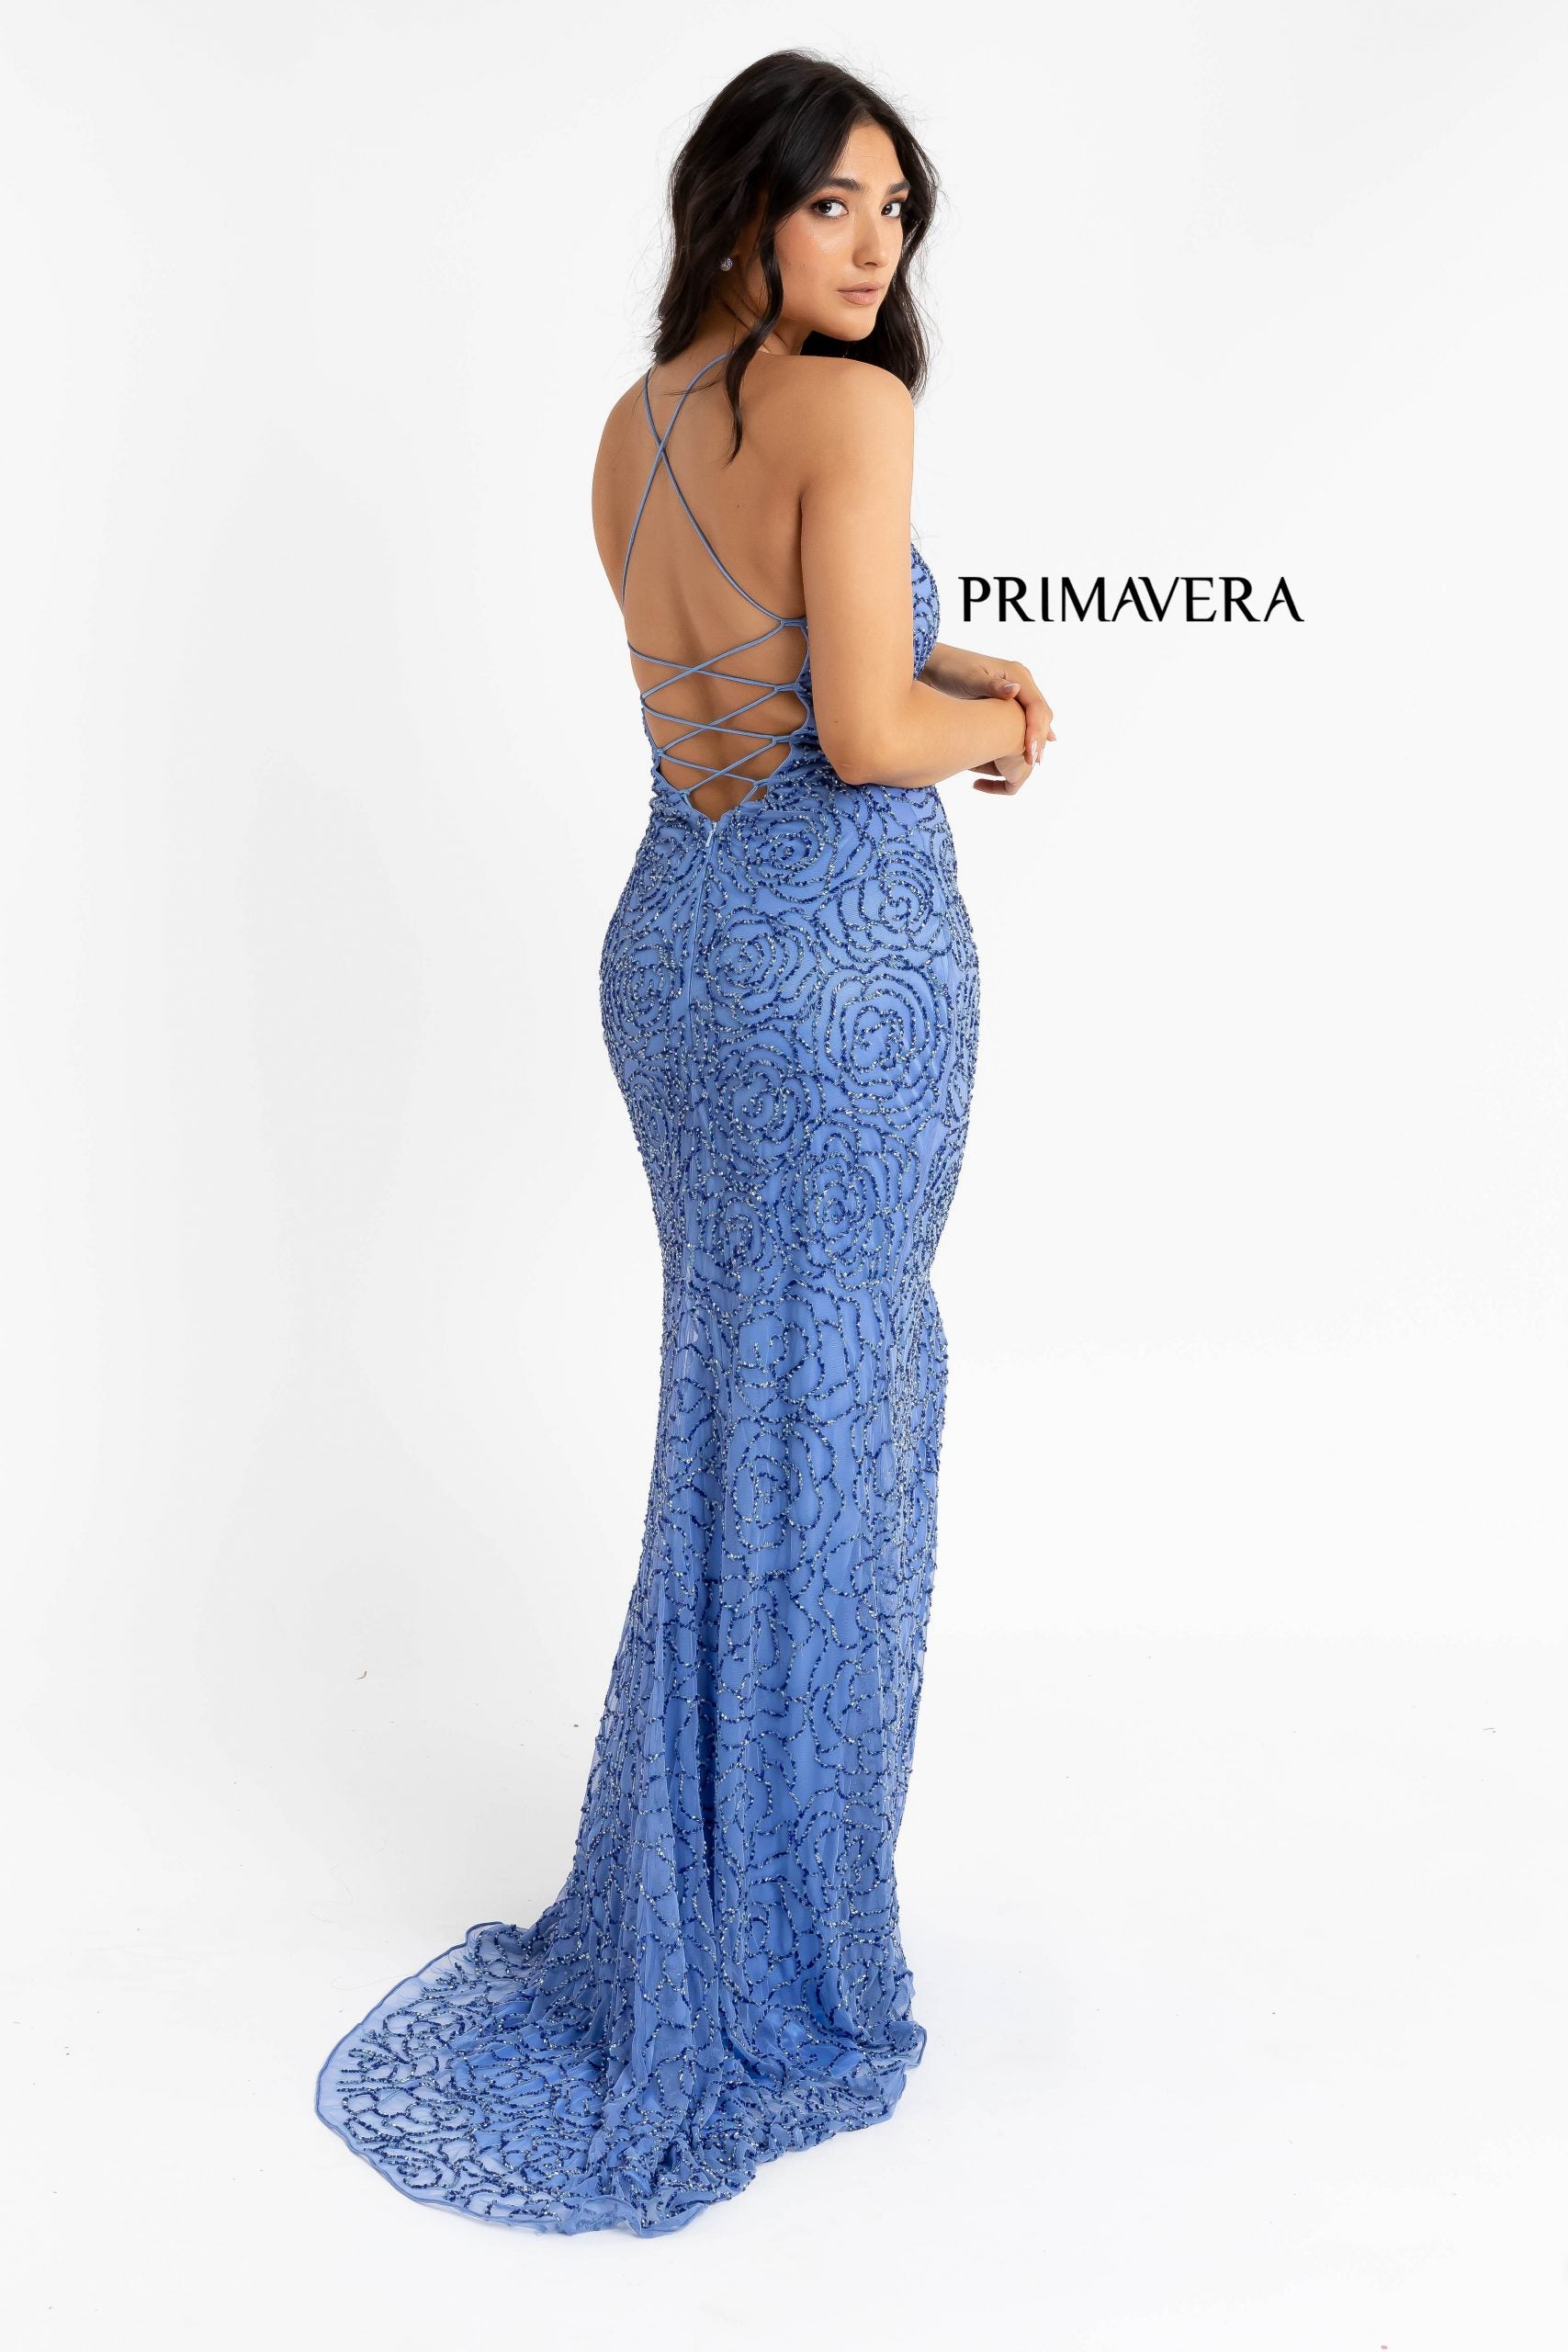 Primavera Couture 3638 is a stunning Long Fitted Formal Evening Prom Dress. Featuring Beaded Floral Embellishments along the entire evening gown. Scoop neckline with spaghetti straps leading around to an open back with a lace up tie corset closure. Slit in skirt and sweeping train. Great Prom & Pageant Style!